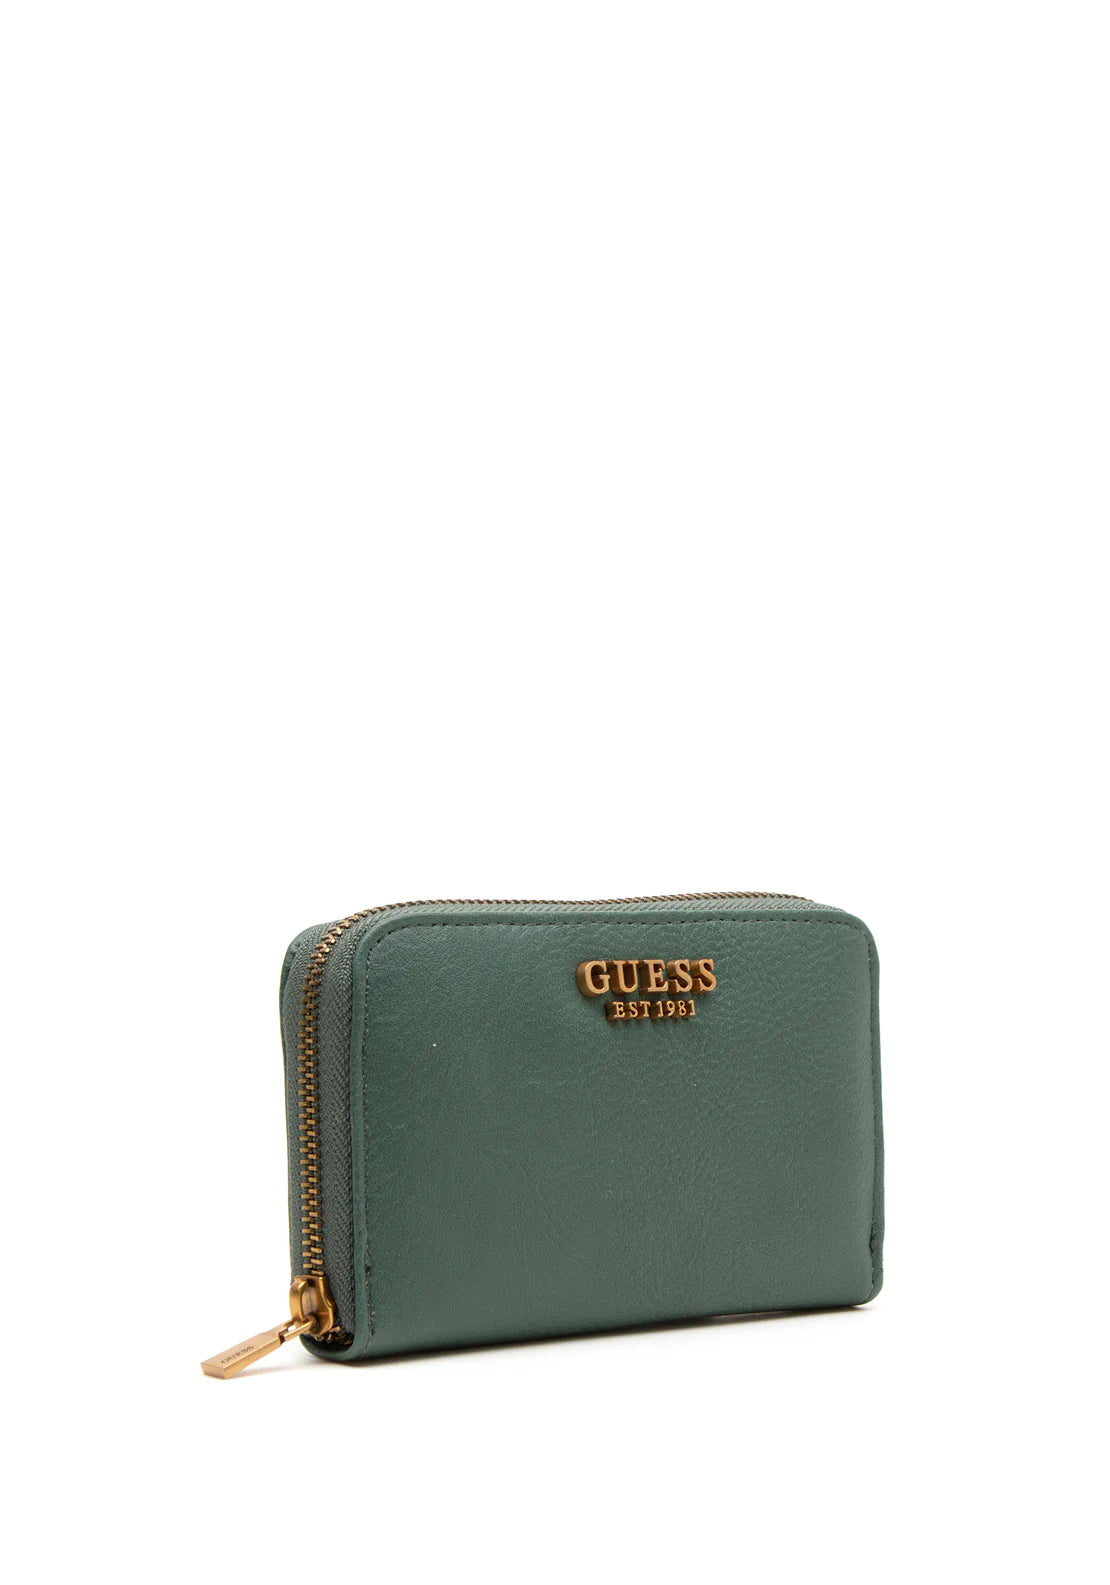 Guess Small Bags | ShopStyle